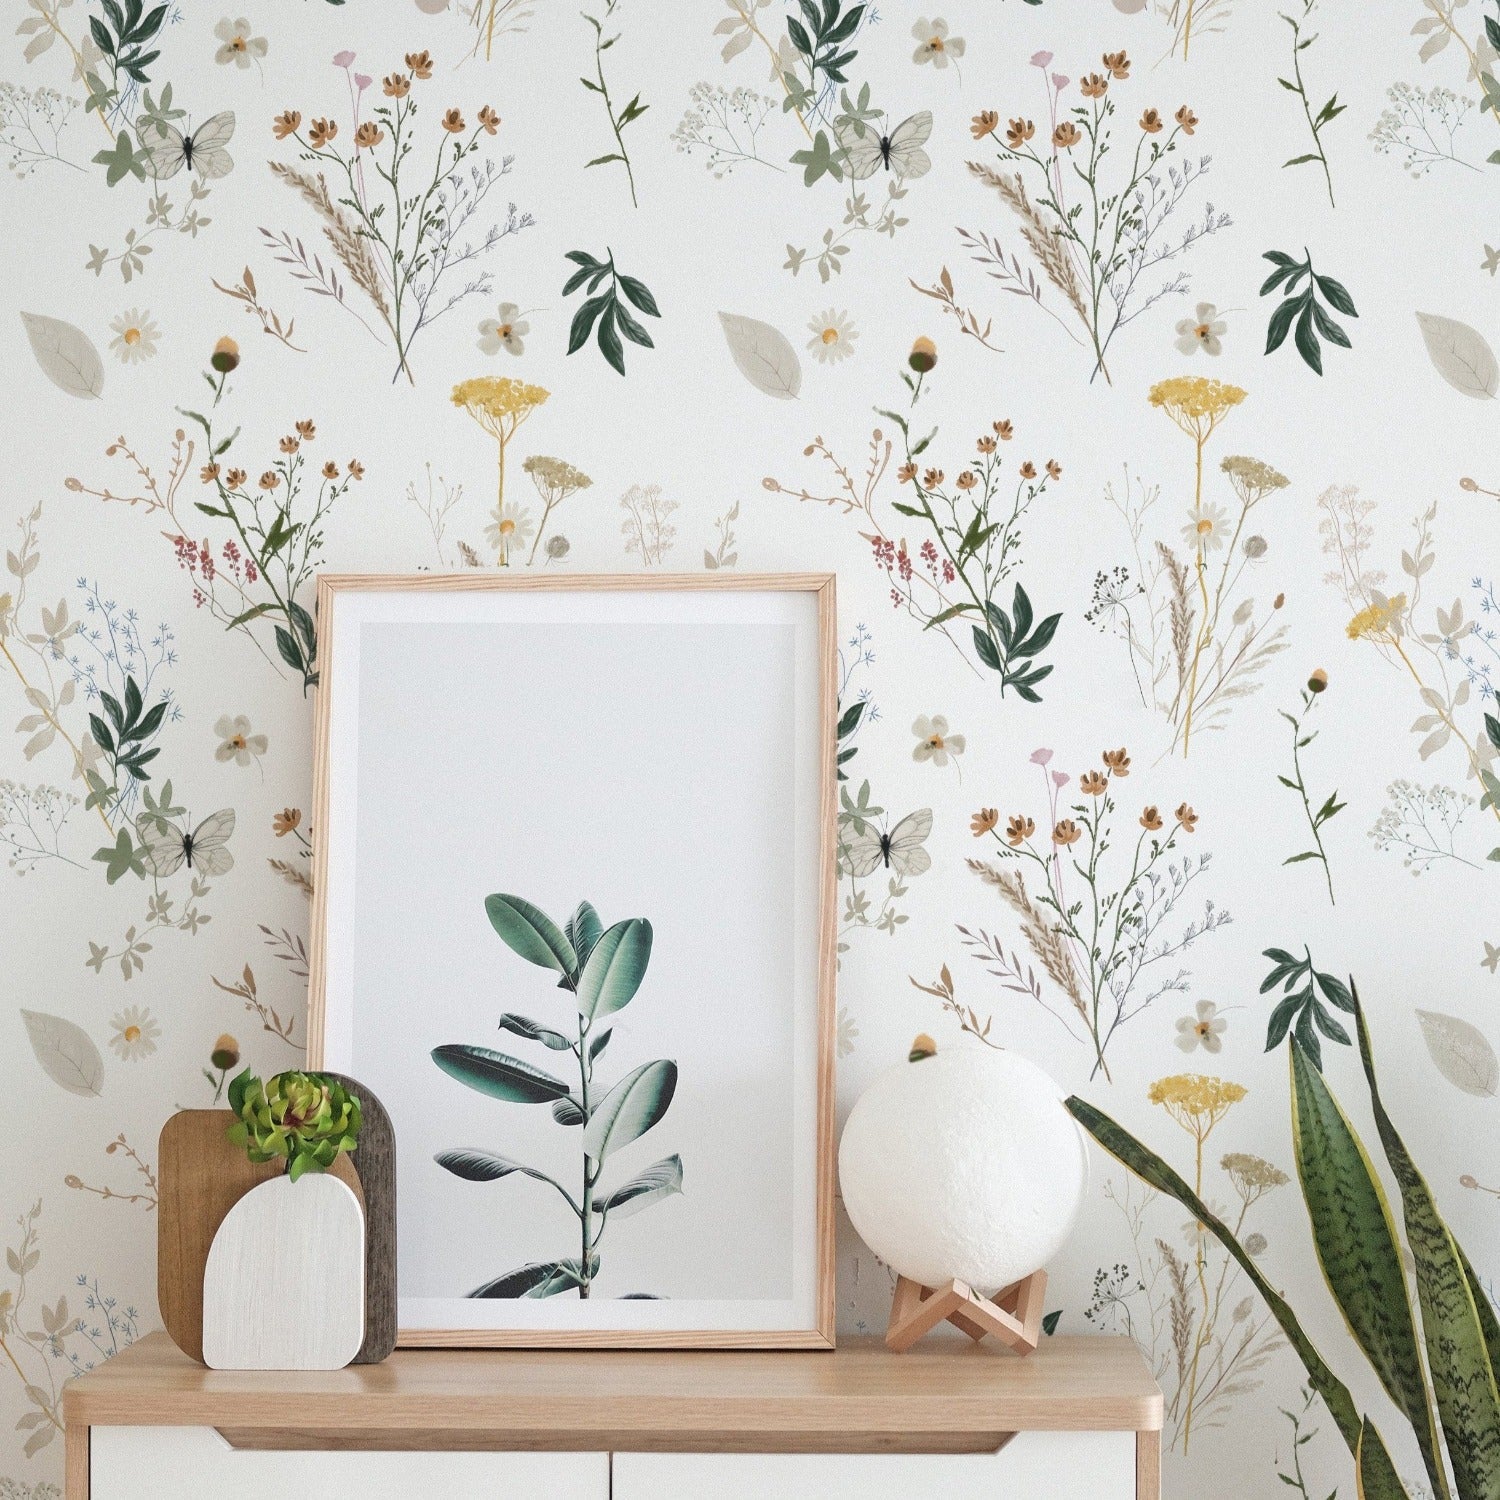 A wall adorned with floral wallpaper with a delicate illustration of wildflowers and leaves in a muted color scheme. A modern Scandinavian-style sideboard displays a framed picture of green foliage, a small white vase, and a textured spherical decor item.